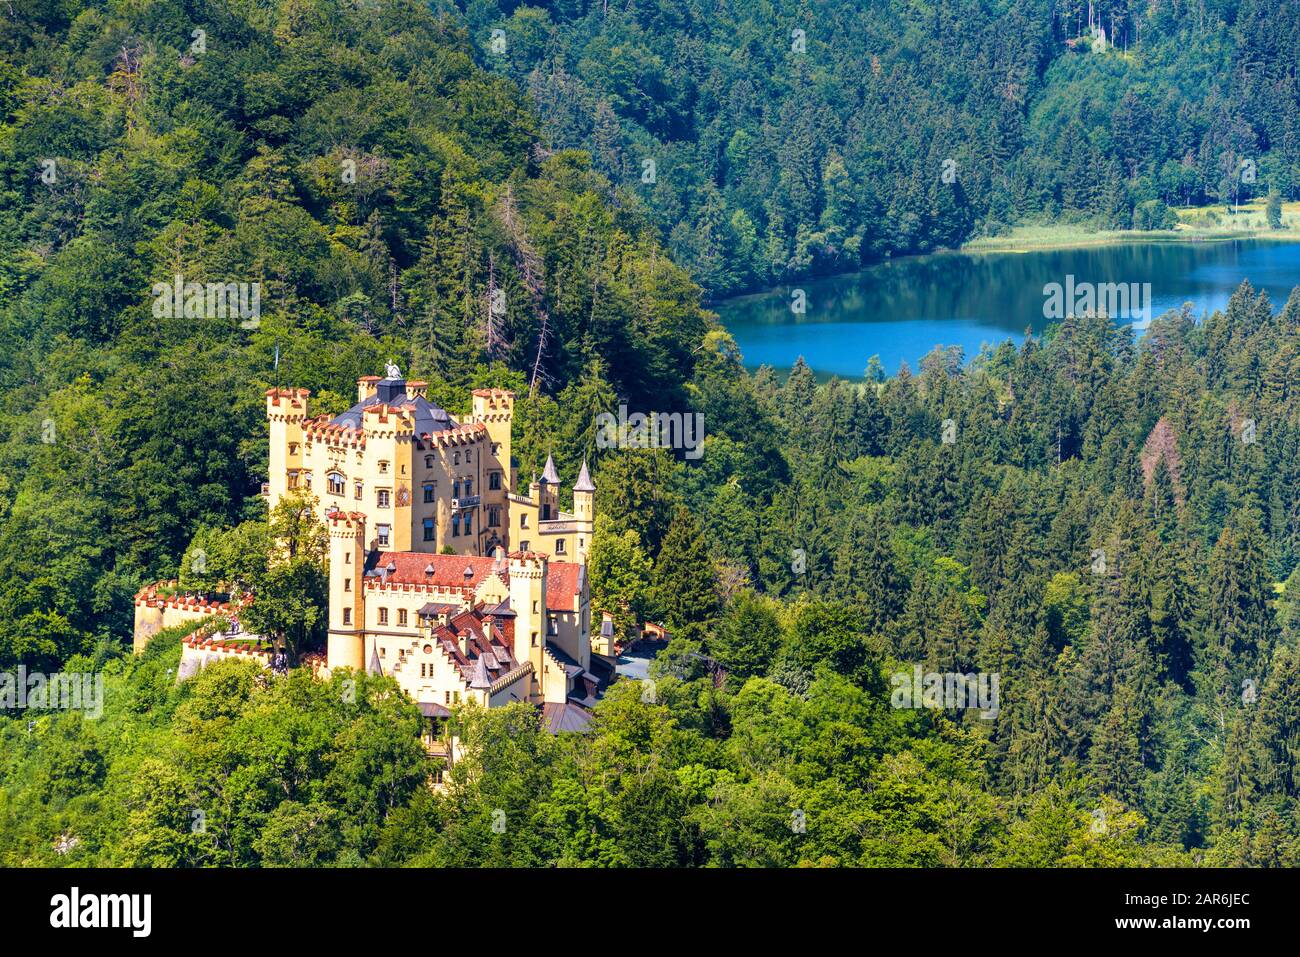 Hohenschwangau Castle near Fussen, Bavaria, Germany. This beautiful castle is a landmark of German Alps. Aerial scenic view of castle and Schwansee la Stock Photo